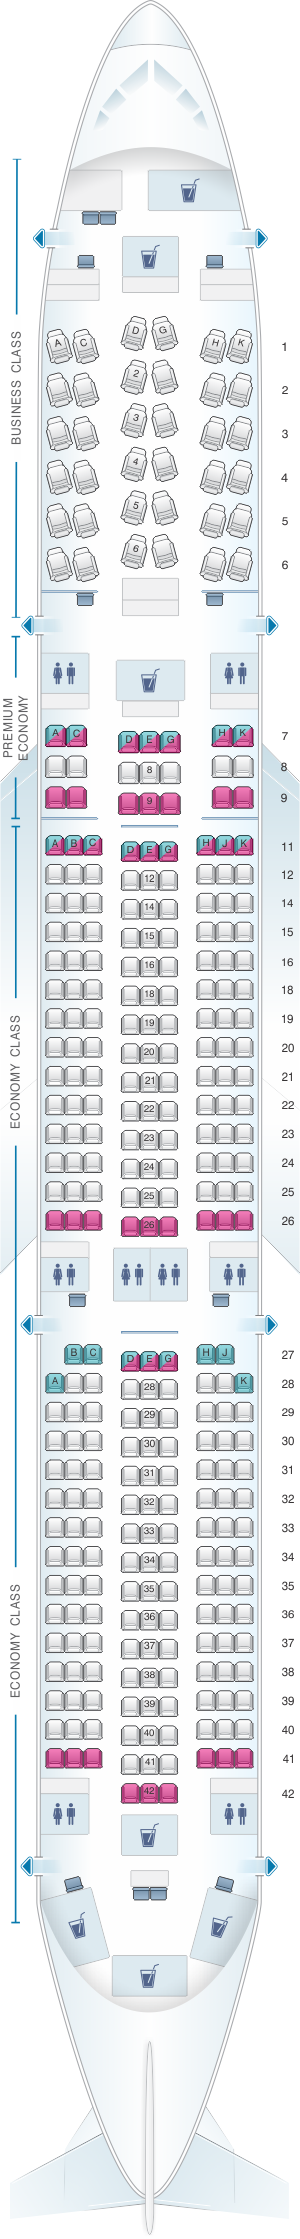 a350 900 seating capacity        <h3 class=